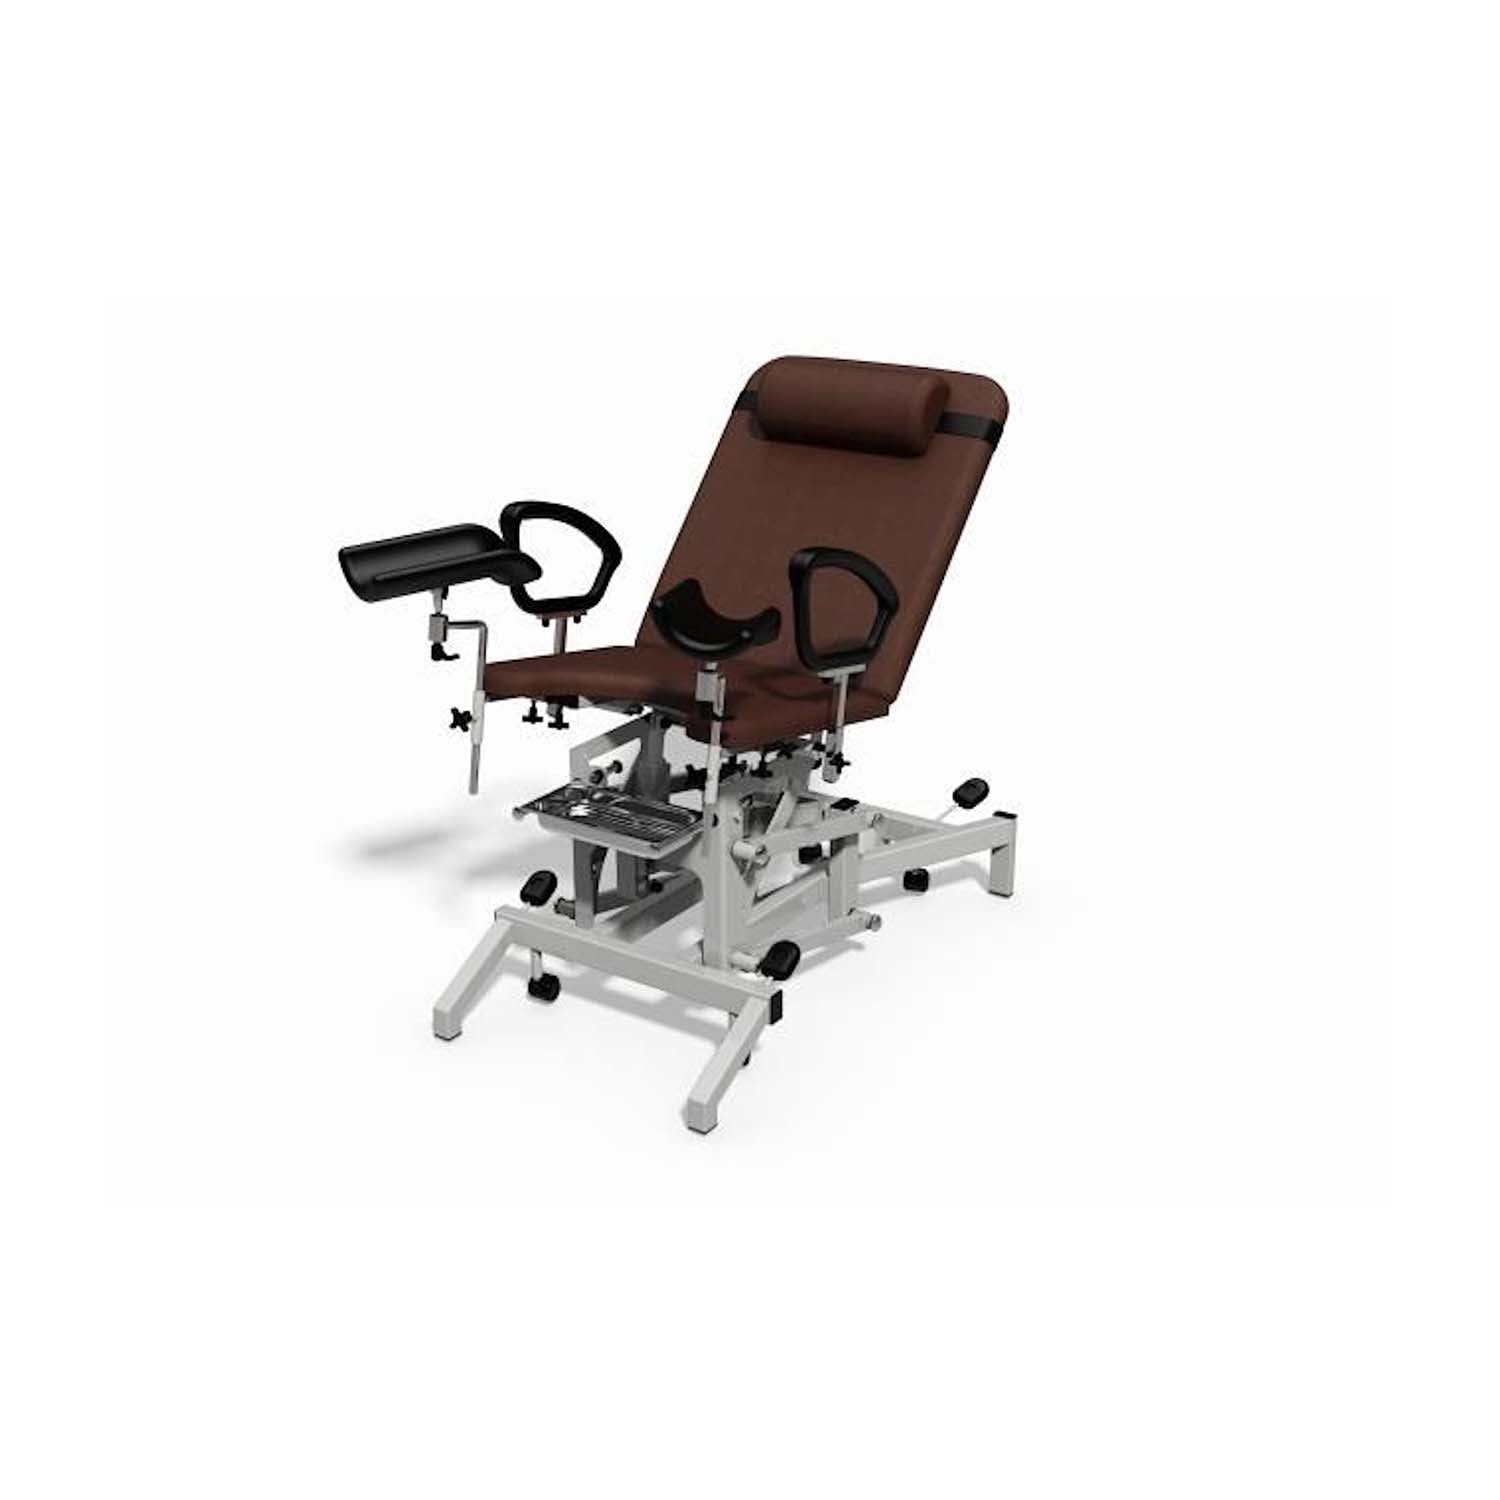 Plinth 2000 Model 93G Gynaecology Chair 1 Motor | Cocoa